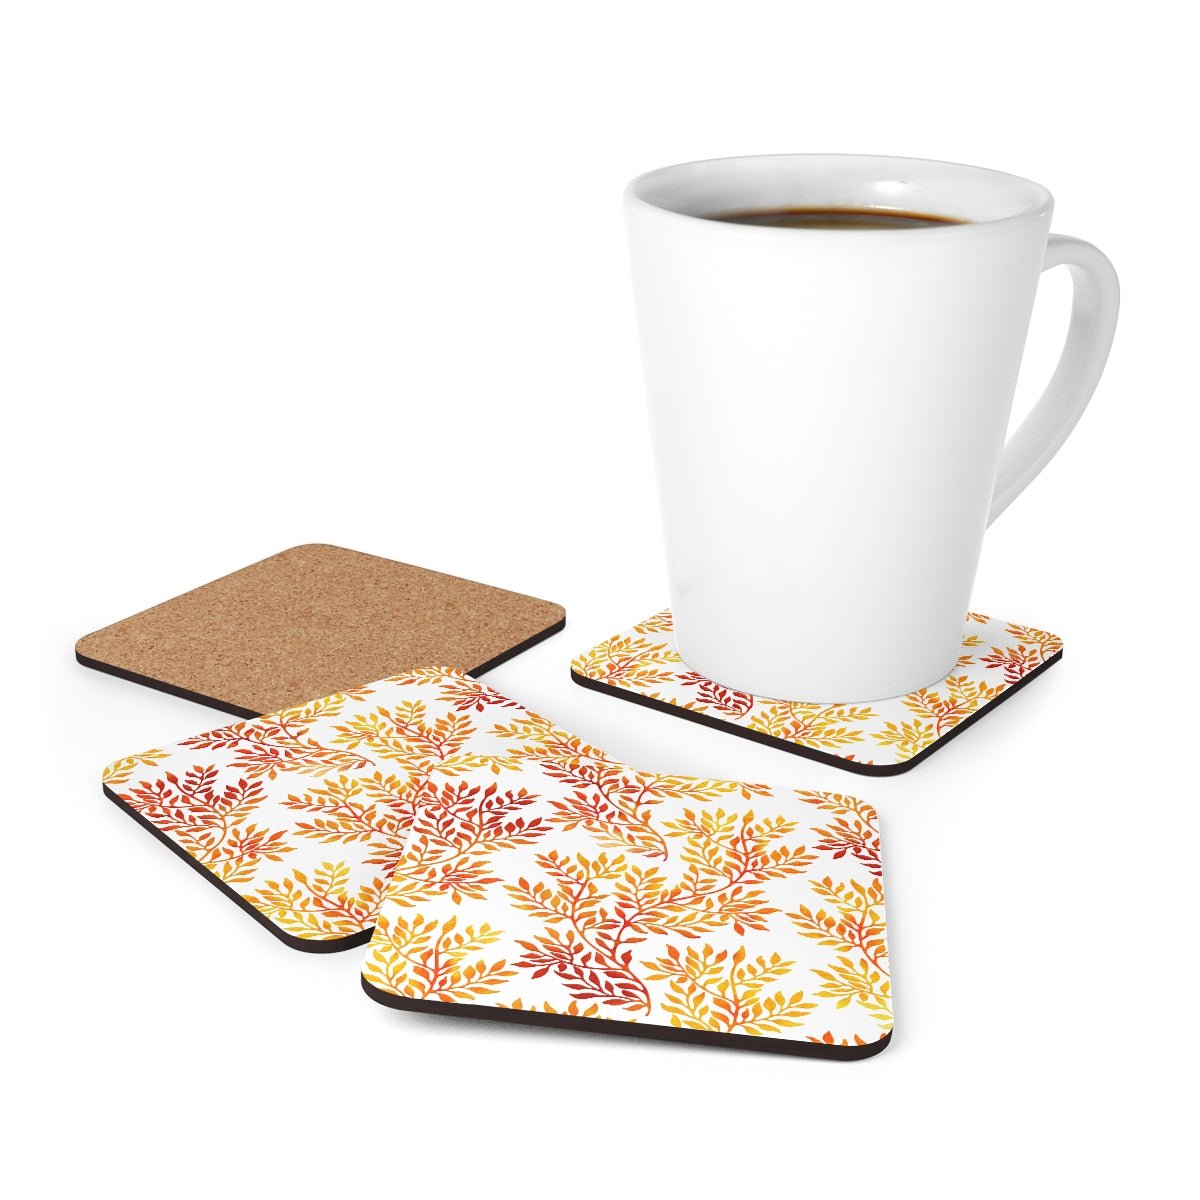 Fall Red and Orange Leaves Corkwood Coaster Set - Puffin Lime